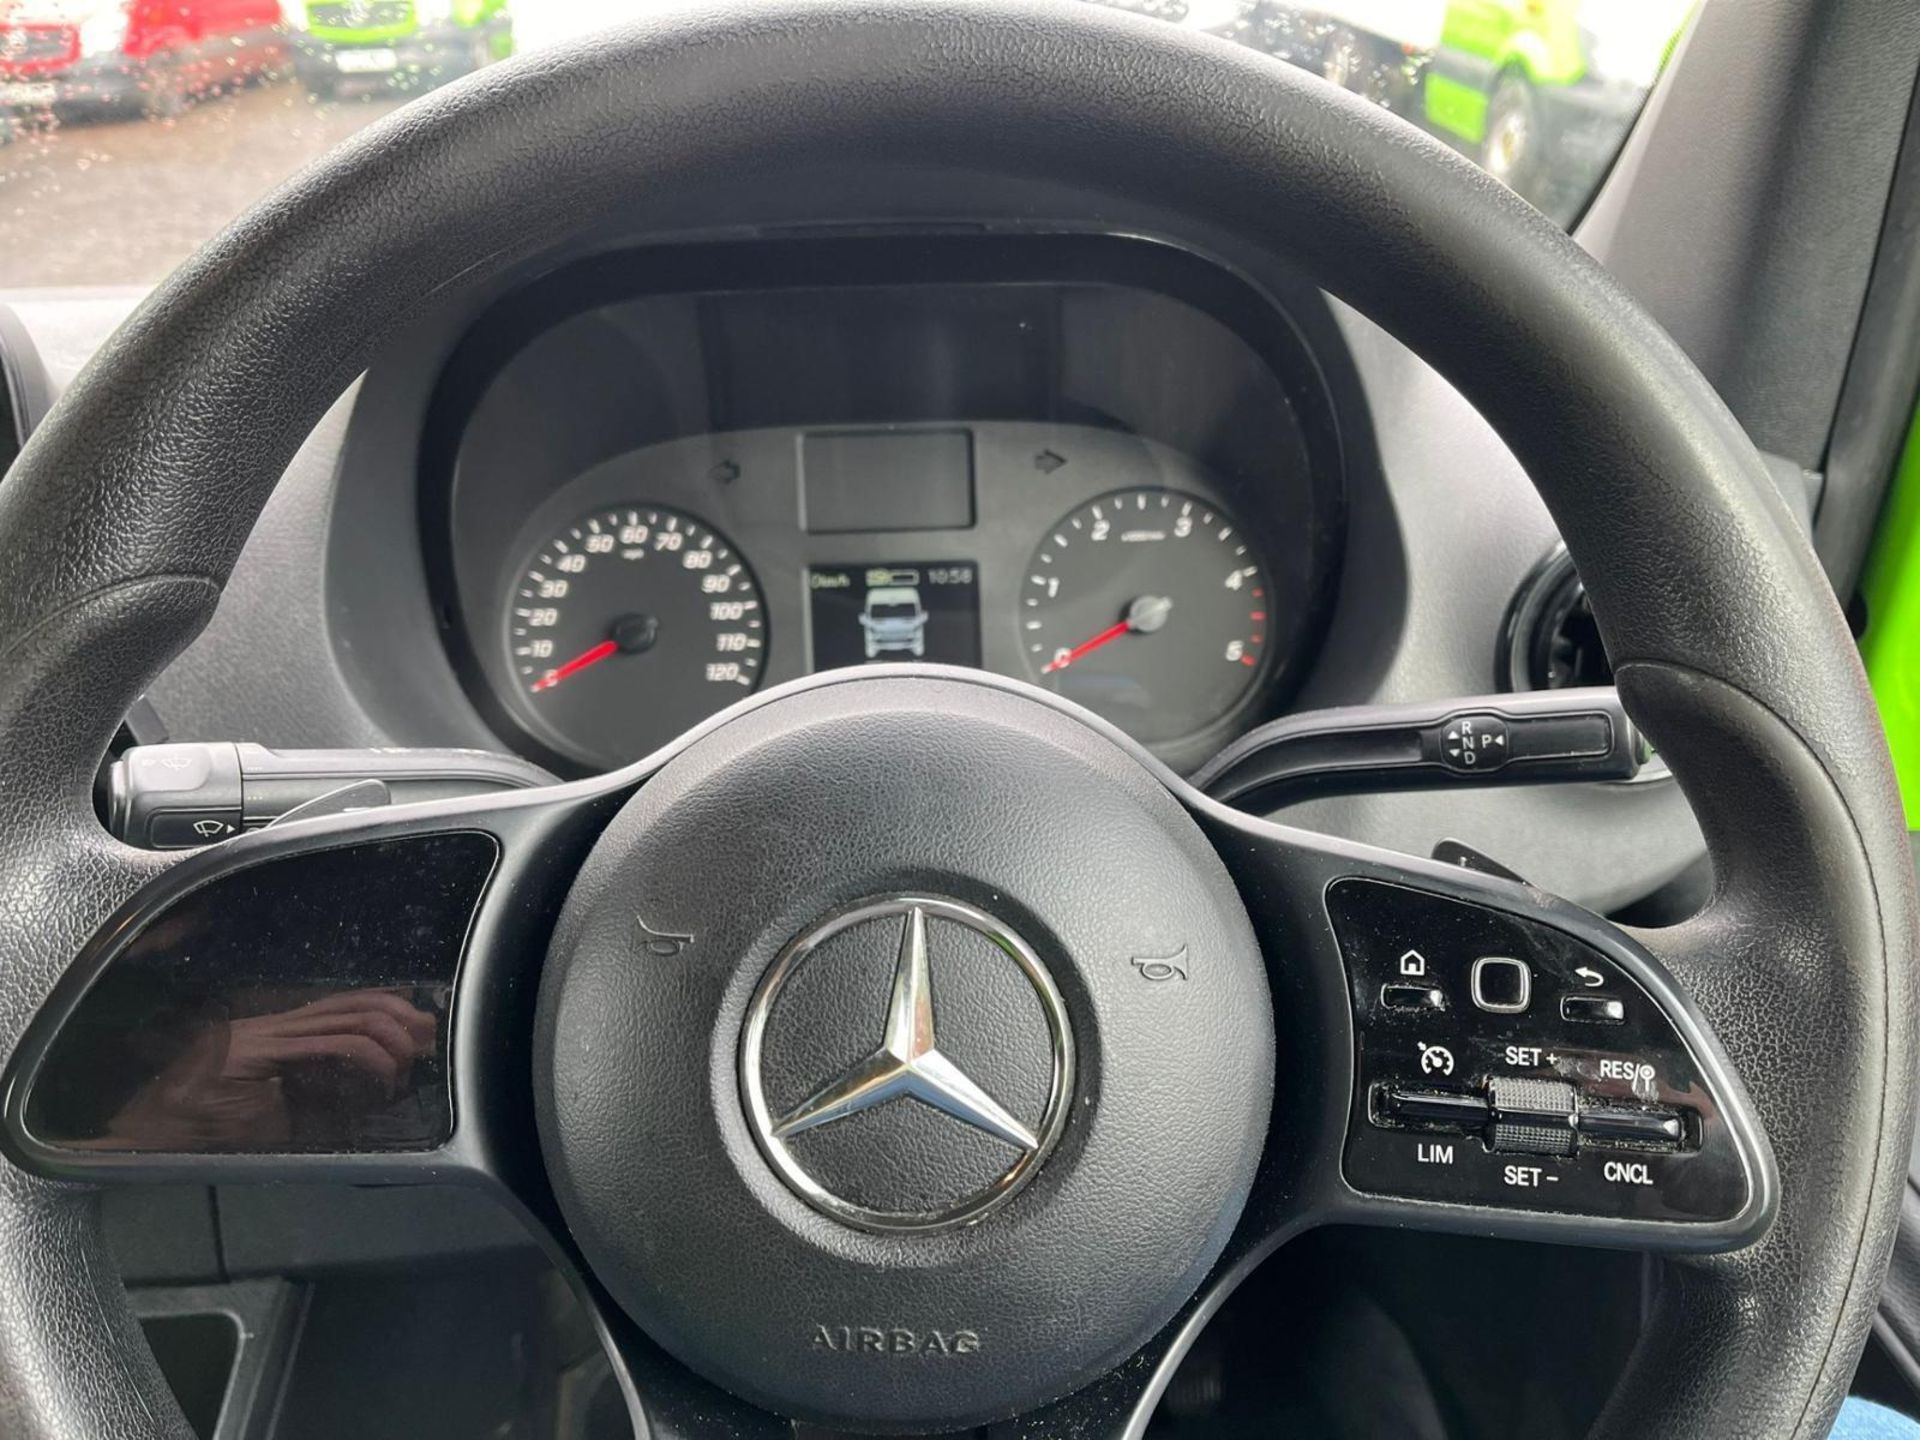 >>>SPECIAL CLEARANCE<<< SMOOTH OPERATOR: 2019 MERCEDES SPRINTER 314 CDI - RELIABLE FLEET VEHICLE - Image 12 of 14